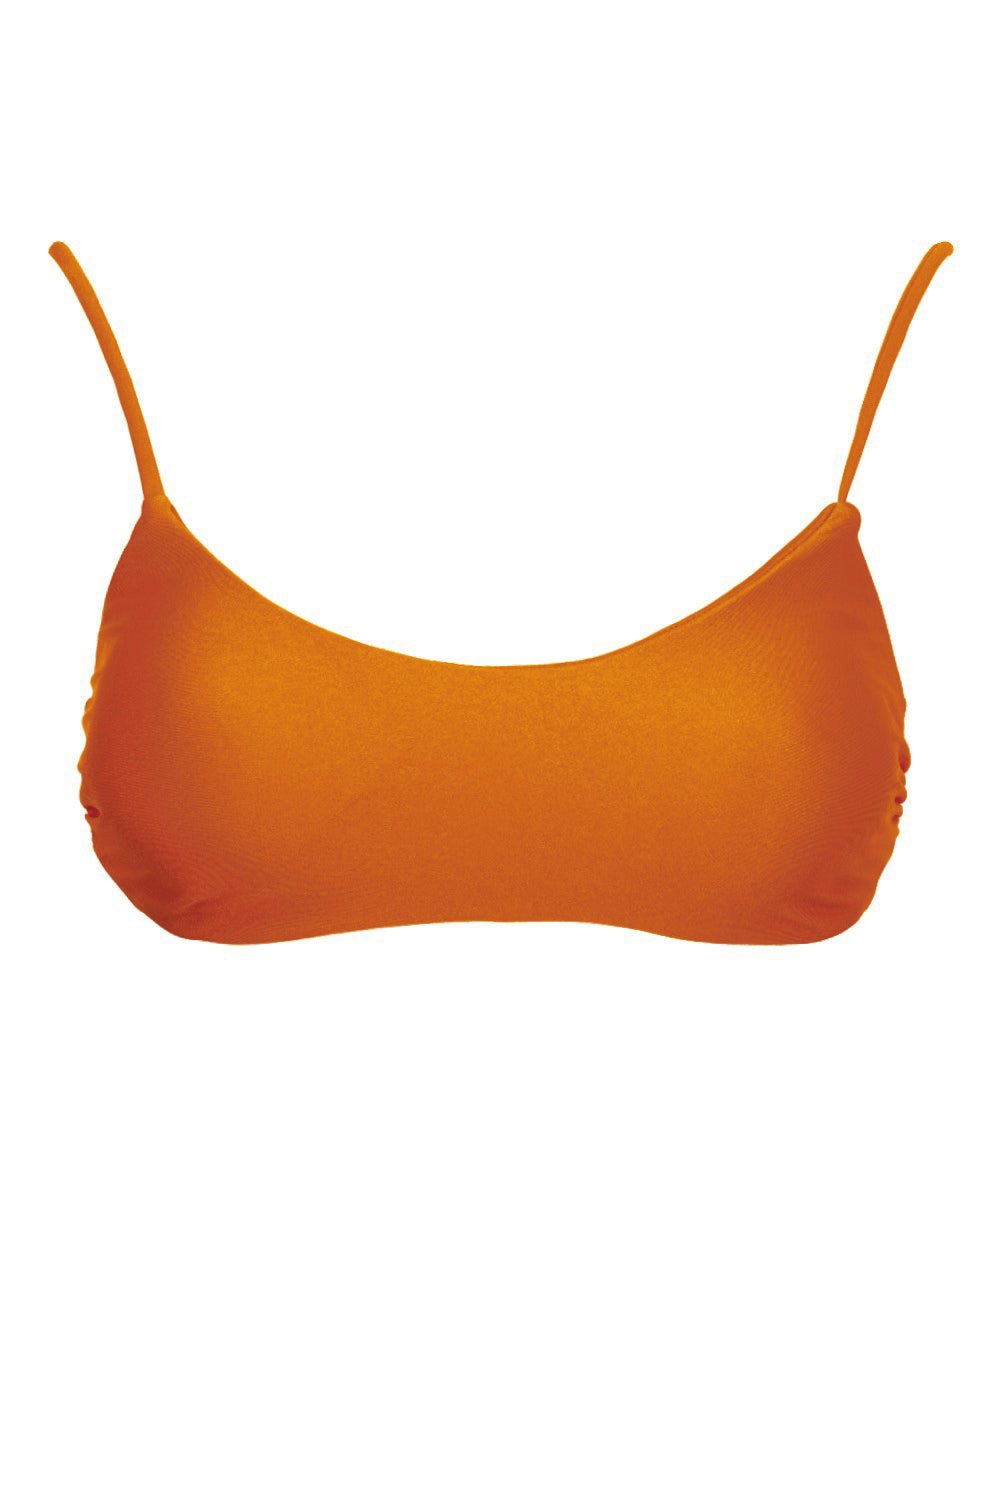 Basic Flame Brassiere